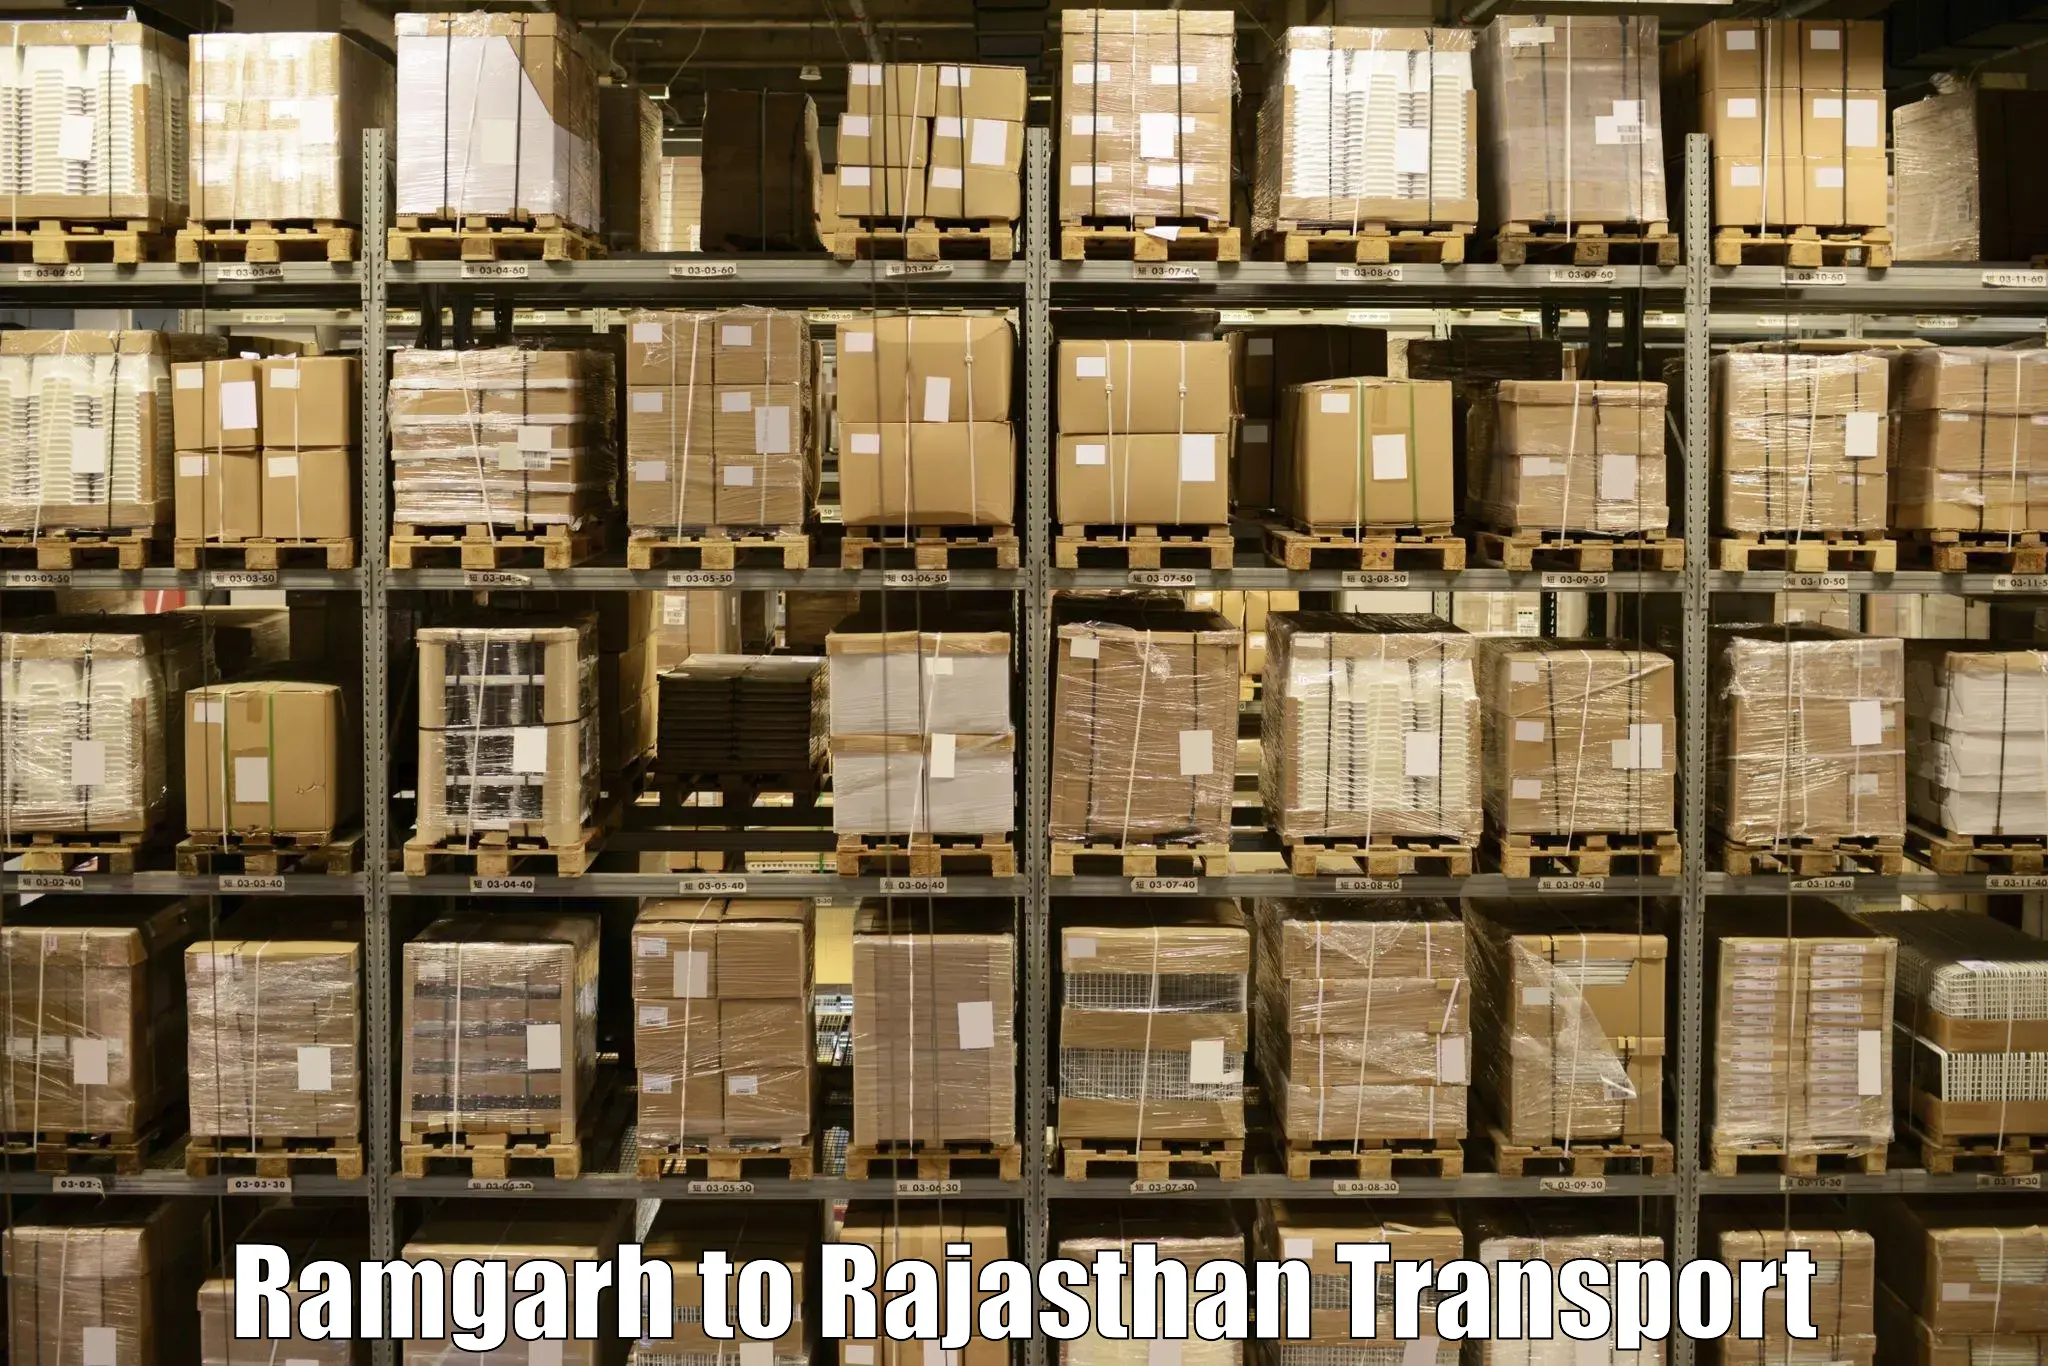 Transport shared services in Ramgarh to Bansur